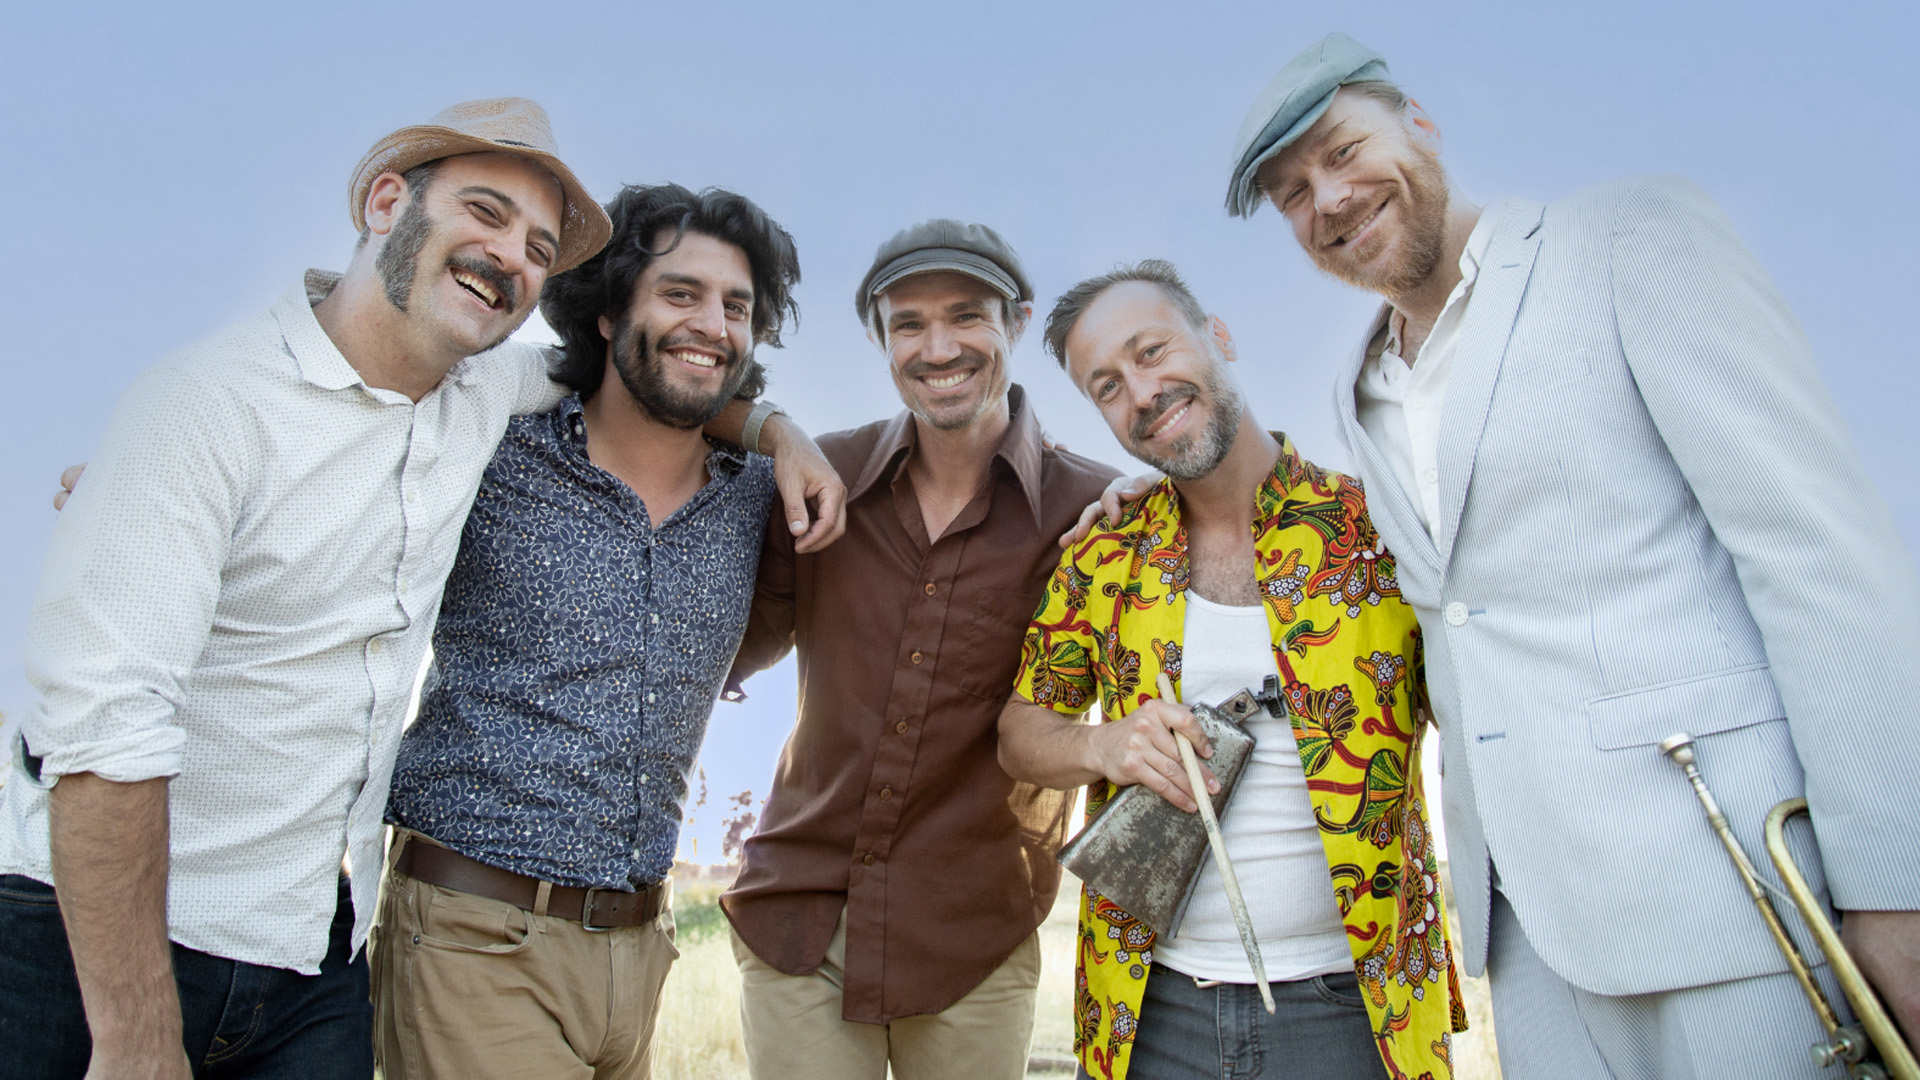 Five members of the California Honeydrops smiling at the camera, two people holding their instruments